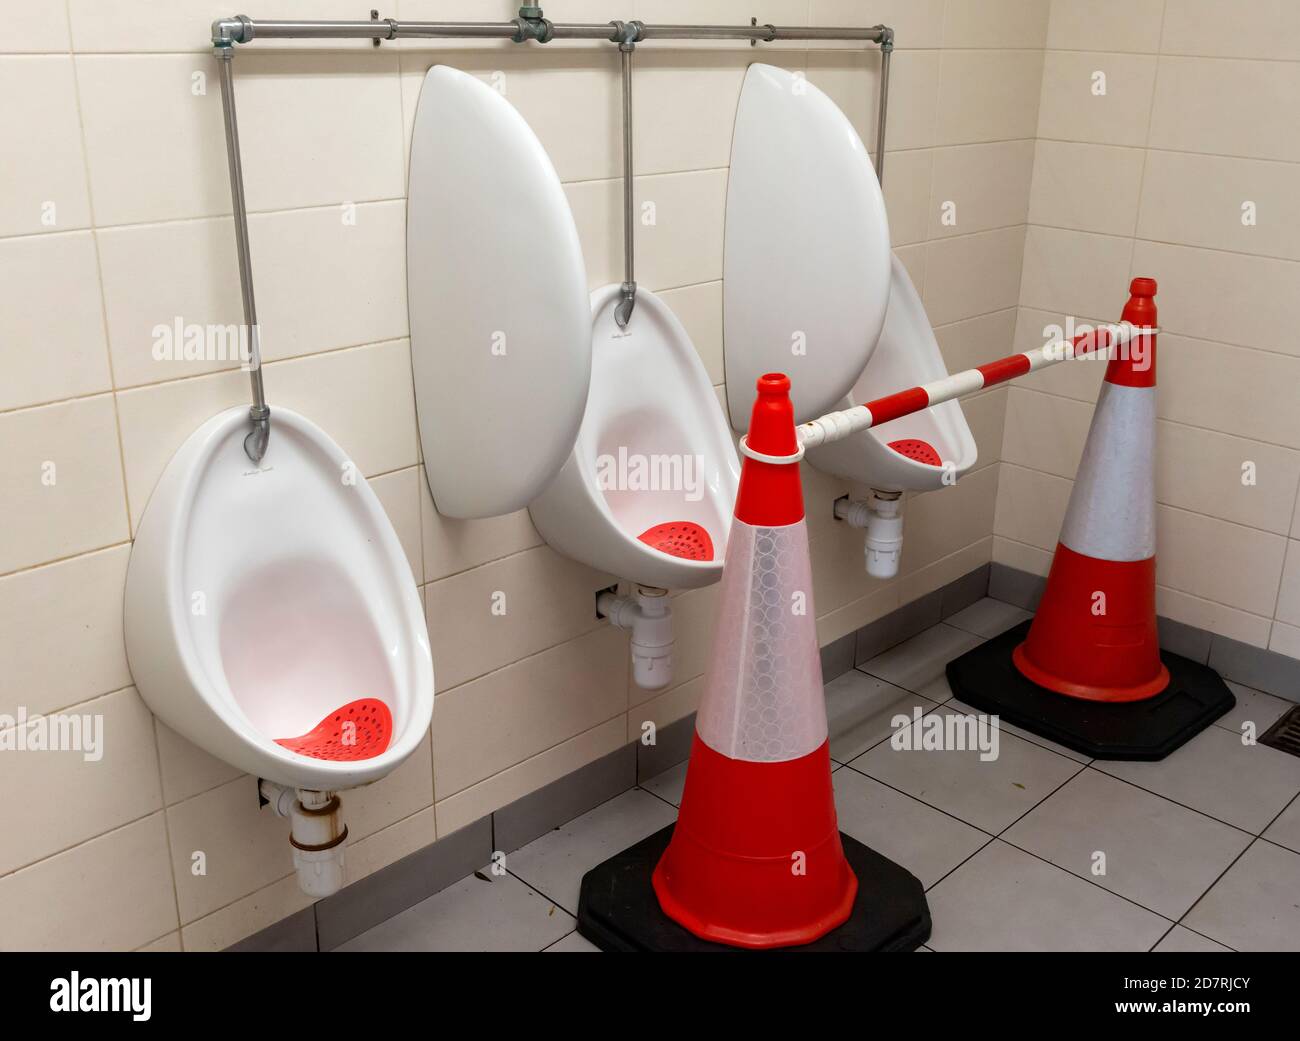 Orange traffic cones in men's gents restroom public toilet and urinals not in use for social distancing due to Covid 19 pandemic outbreak in Ireland Stock Photo